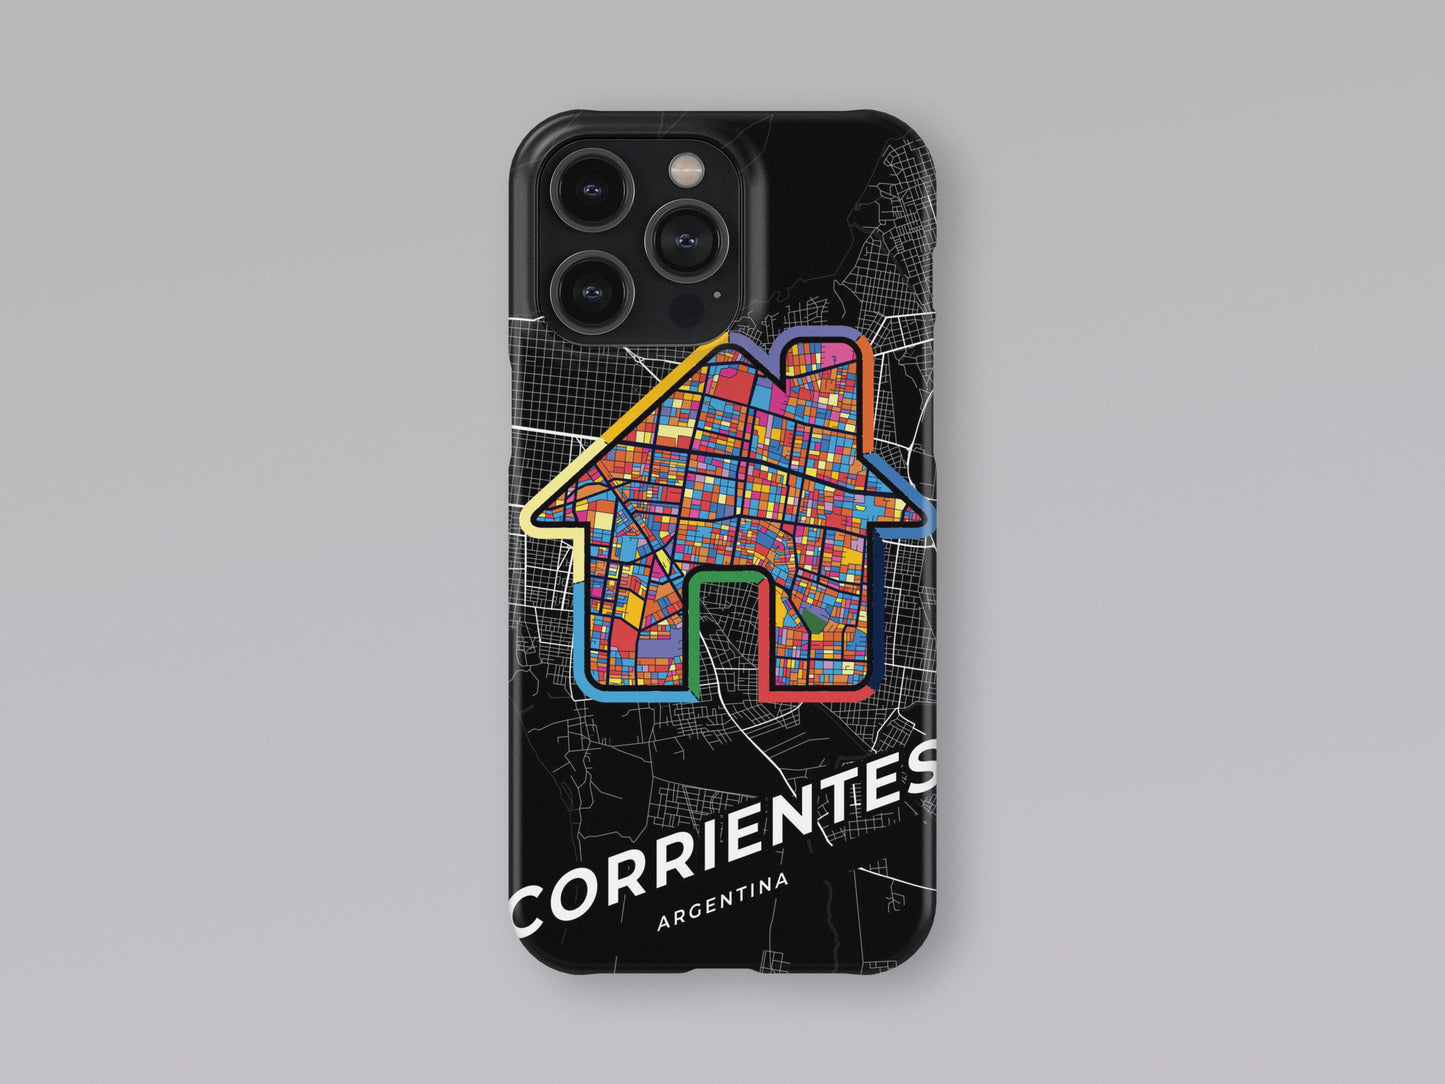 Corrientes Argentina slim phone case with colorful icon. Birthday, wedding or housewarming gift. Couple match cases. 3